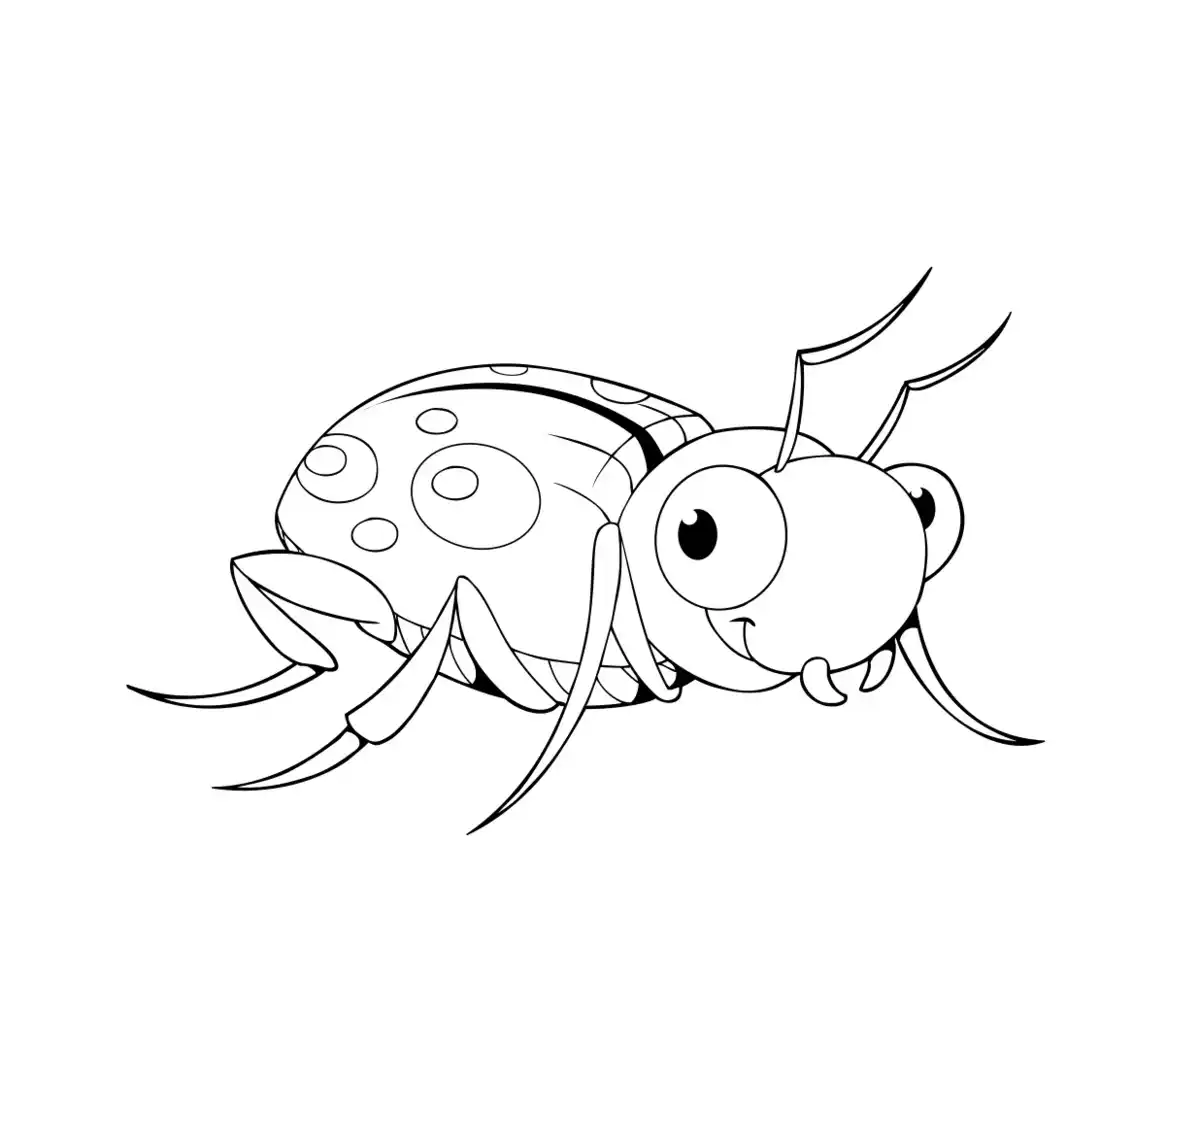 Insect Kids Coloring Pages Pdf